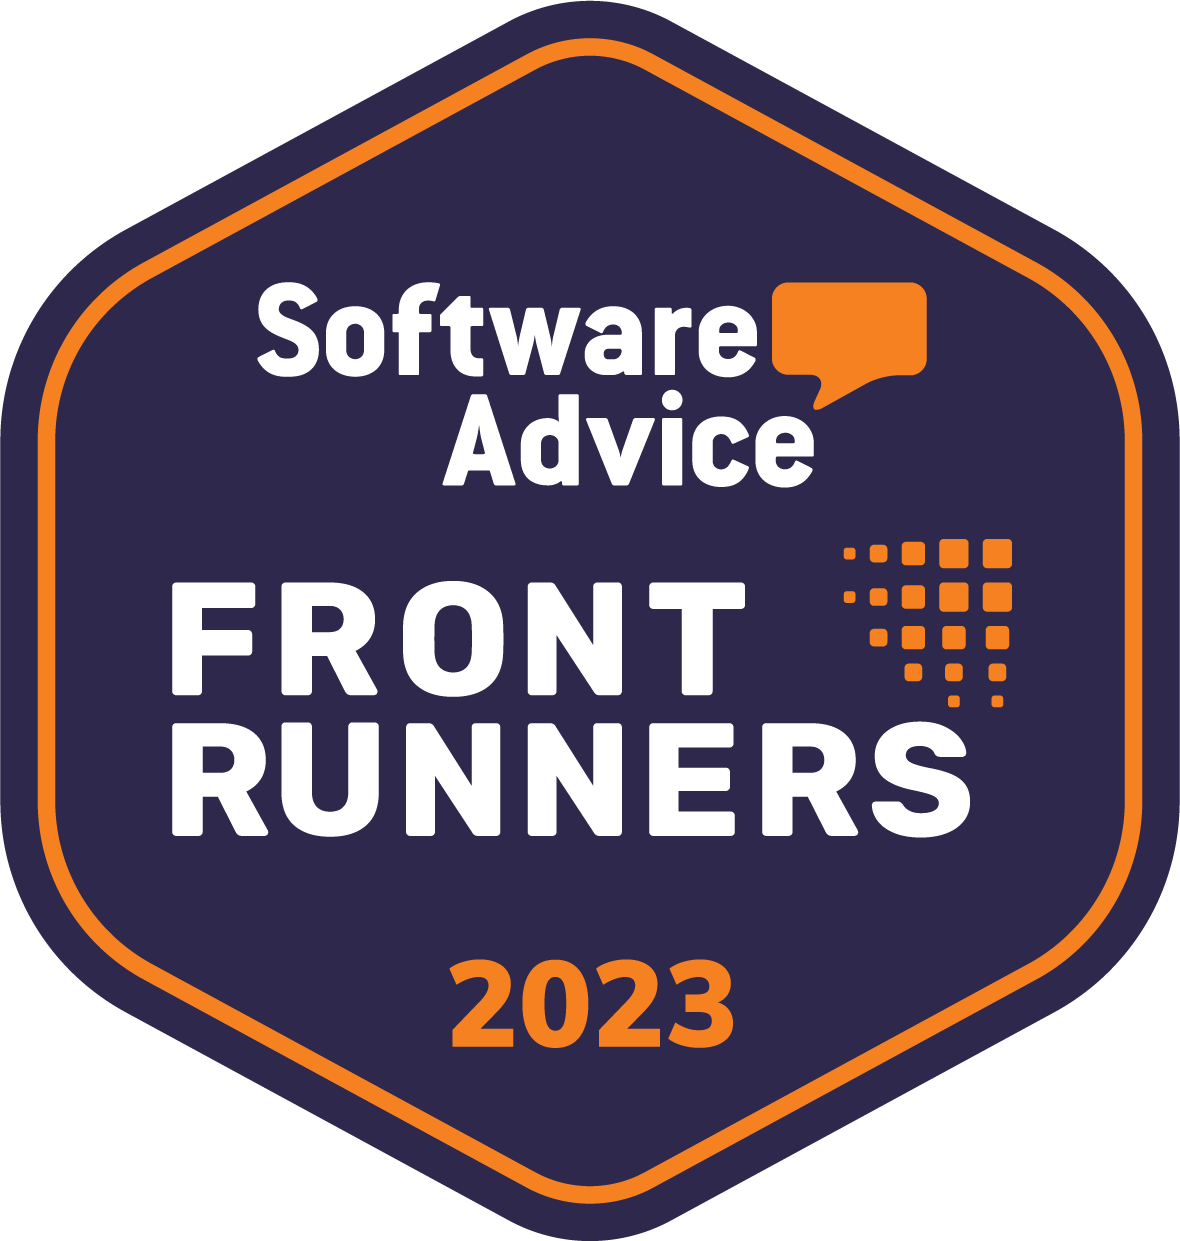 Software Advice Front Runner 2022 badge